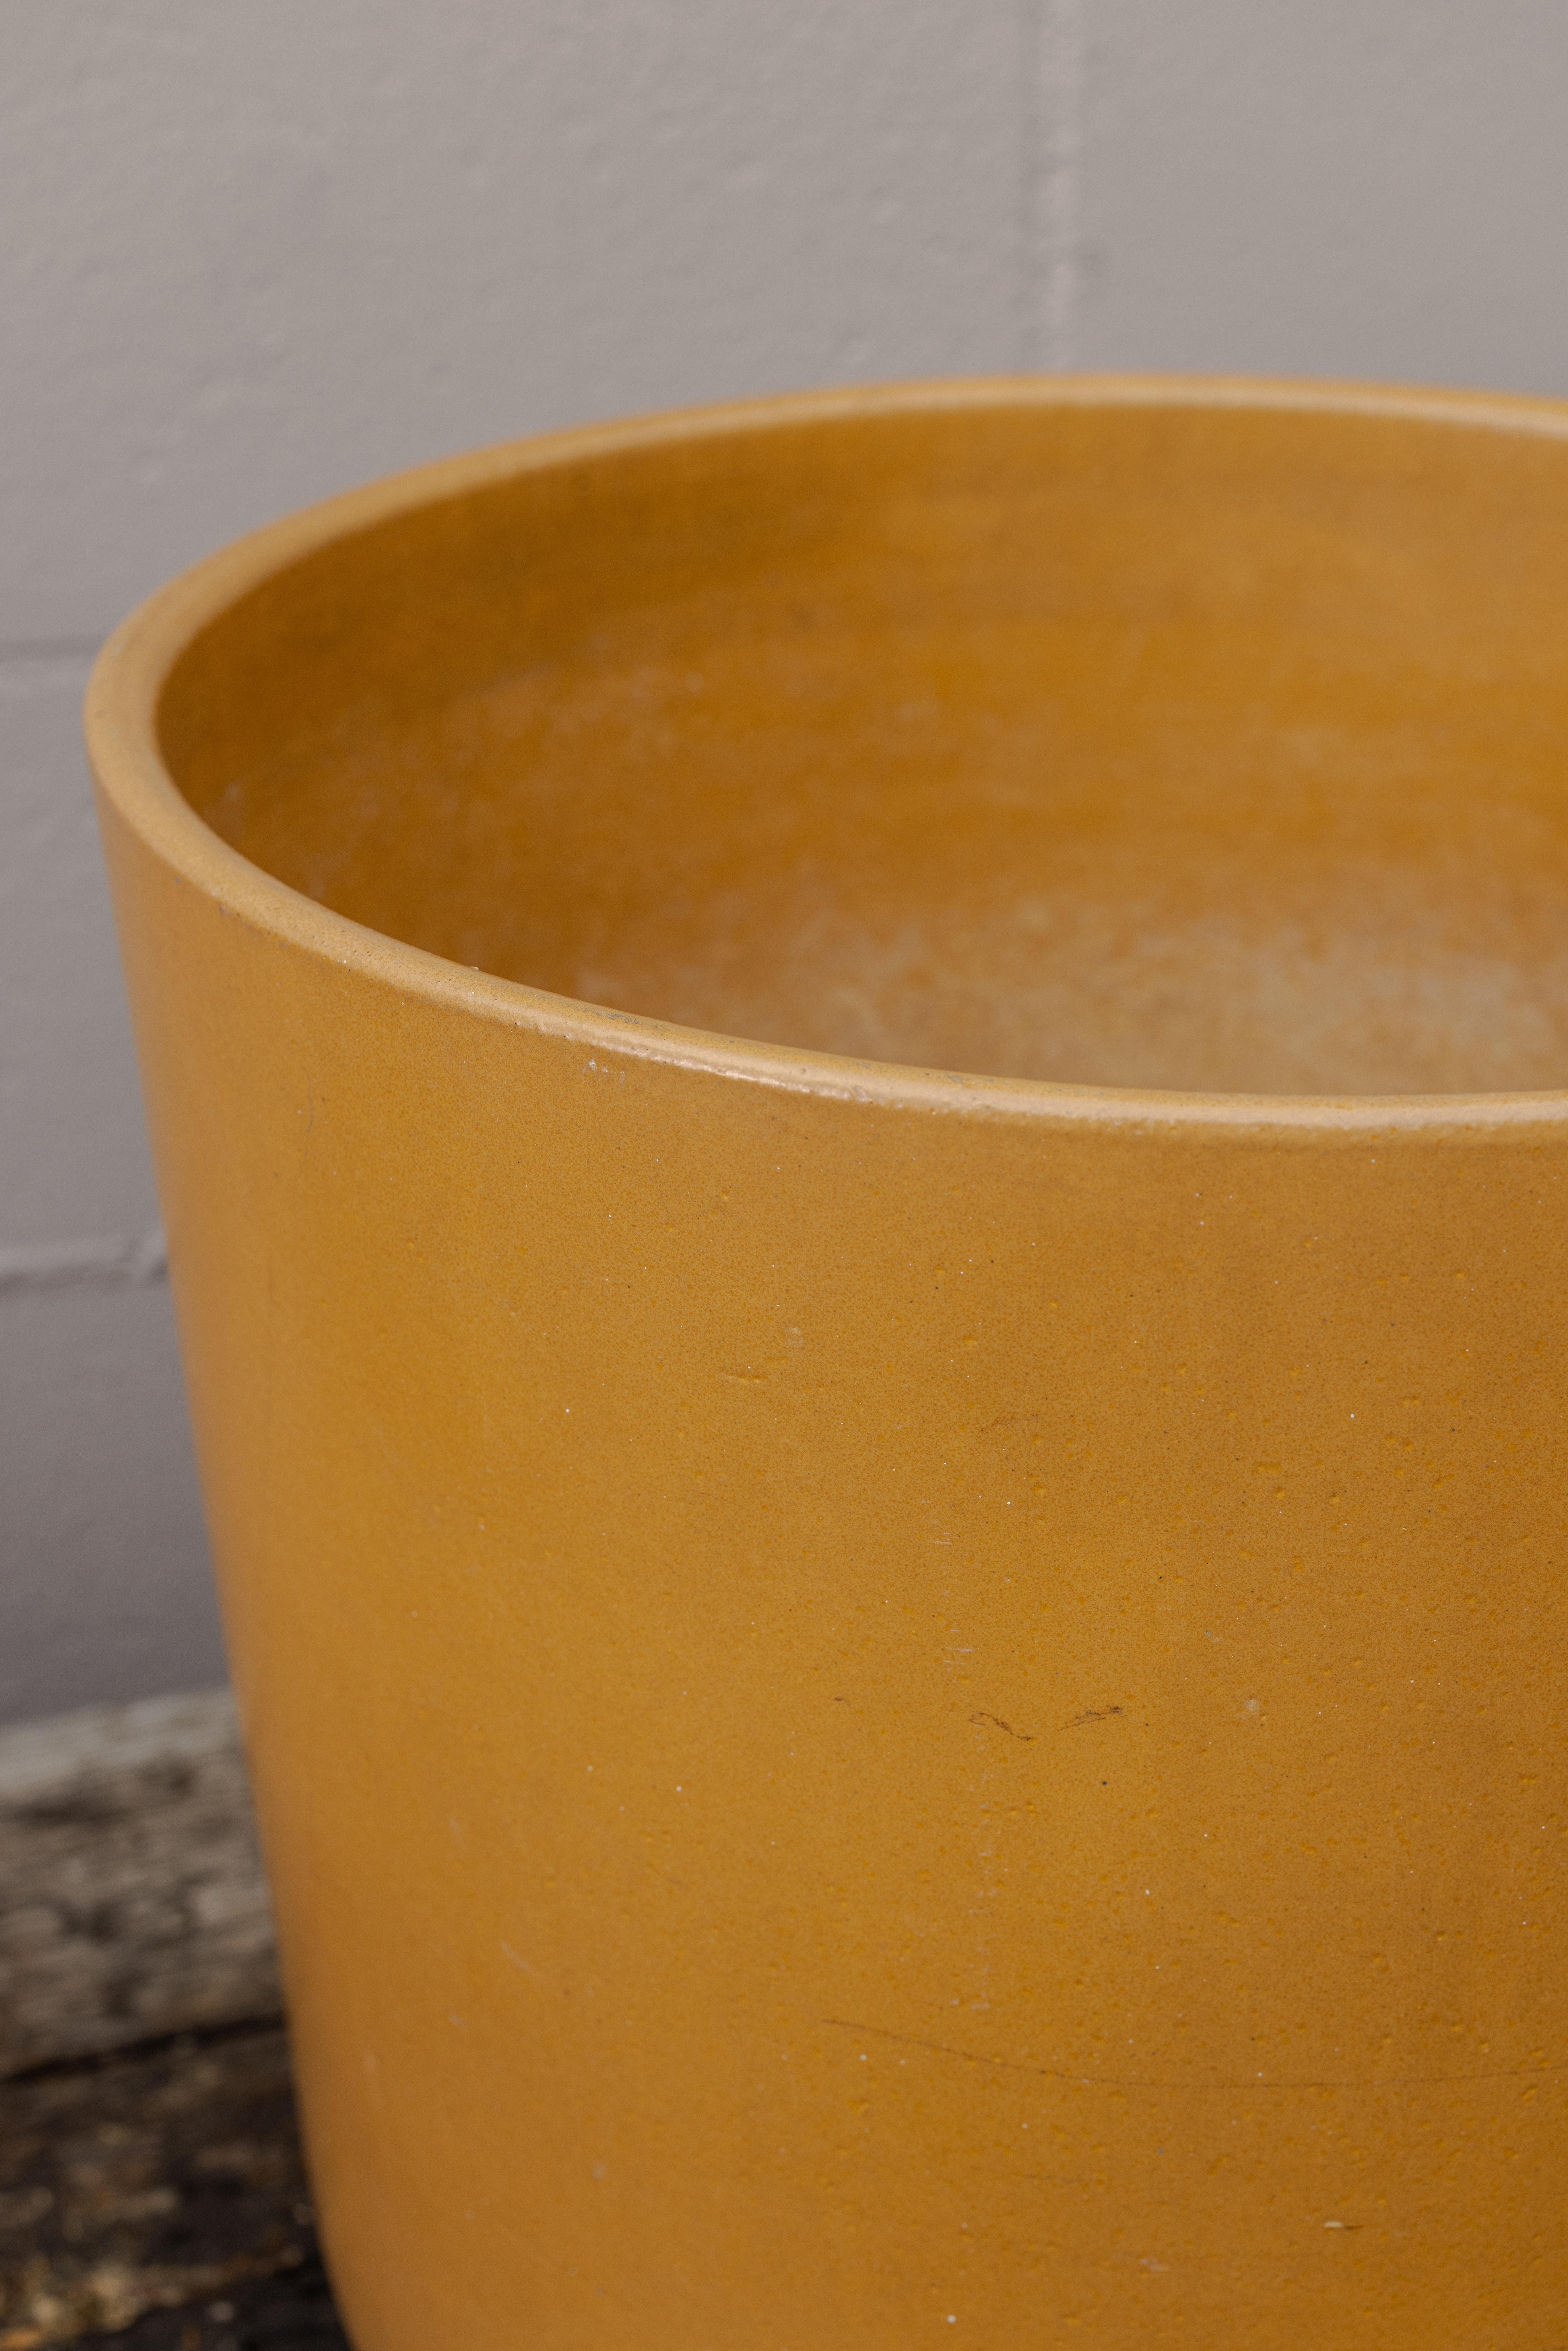 Model LT-15 Planter by Malcolm Leland for Architectural Pottery In Good Condition For Sale In Los Angeles, CA